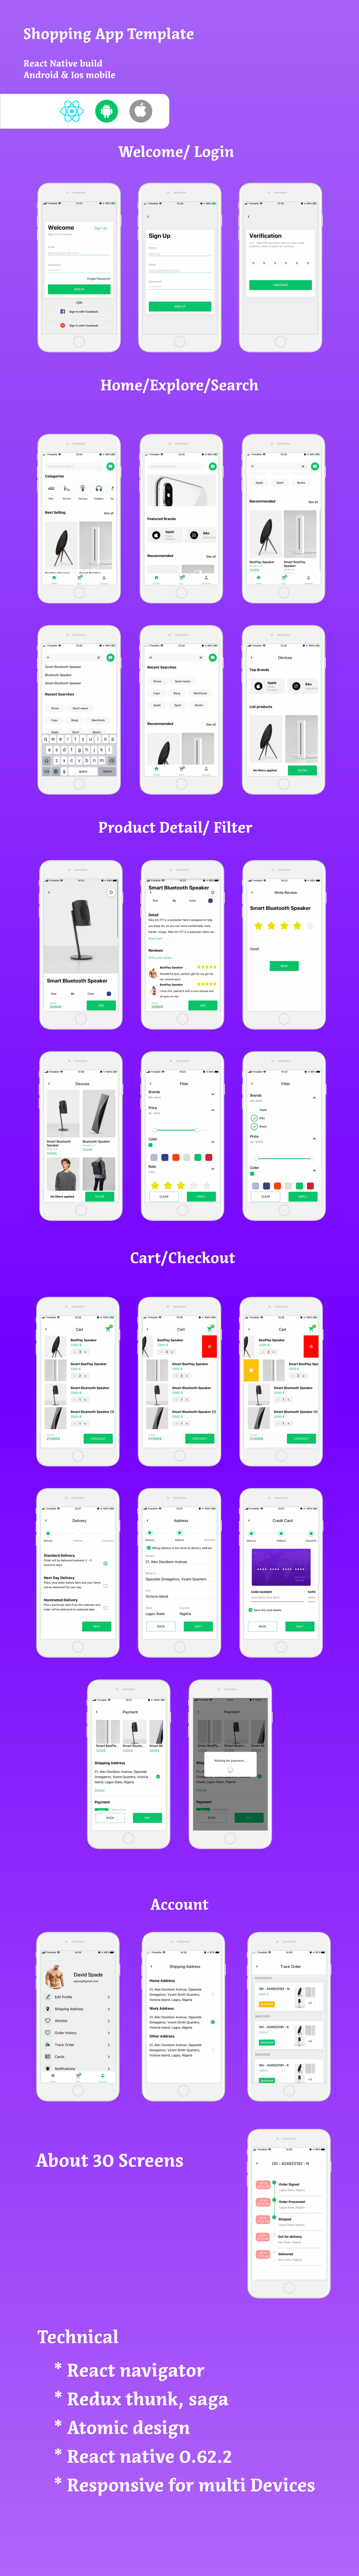 Avenue - React Native Ecommerce template - Android/IOS - 1